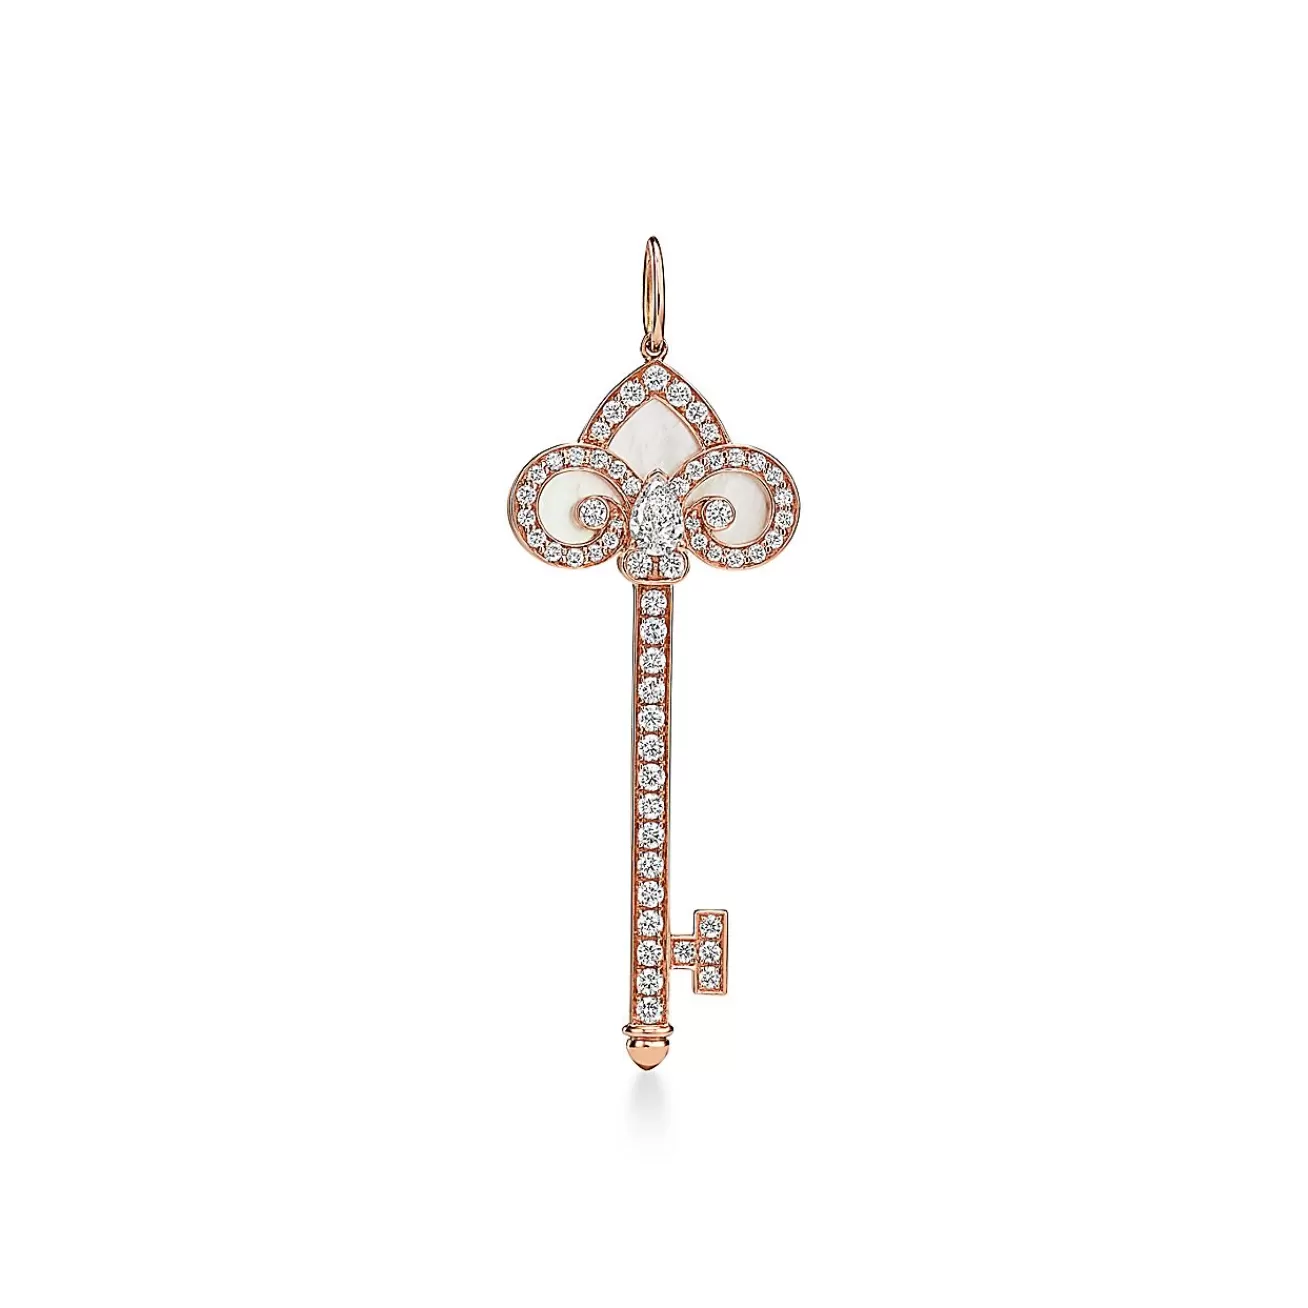 Tiffany & Co. Tiffany Keys Fleur de Lis Key in Rose Gold with Diamonds and Mother-of-pearl | ^ Rose Gold Jewelry | Diamond Jewelry